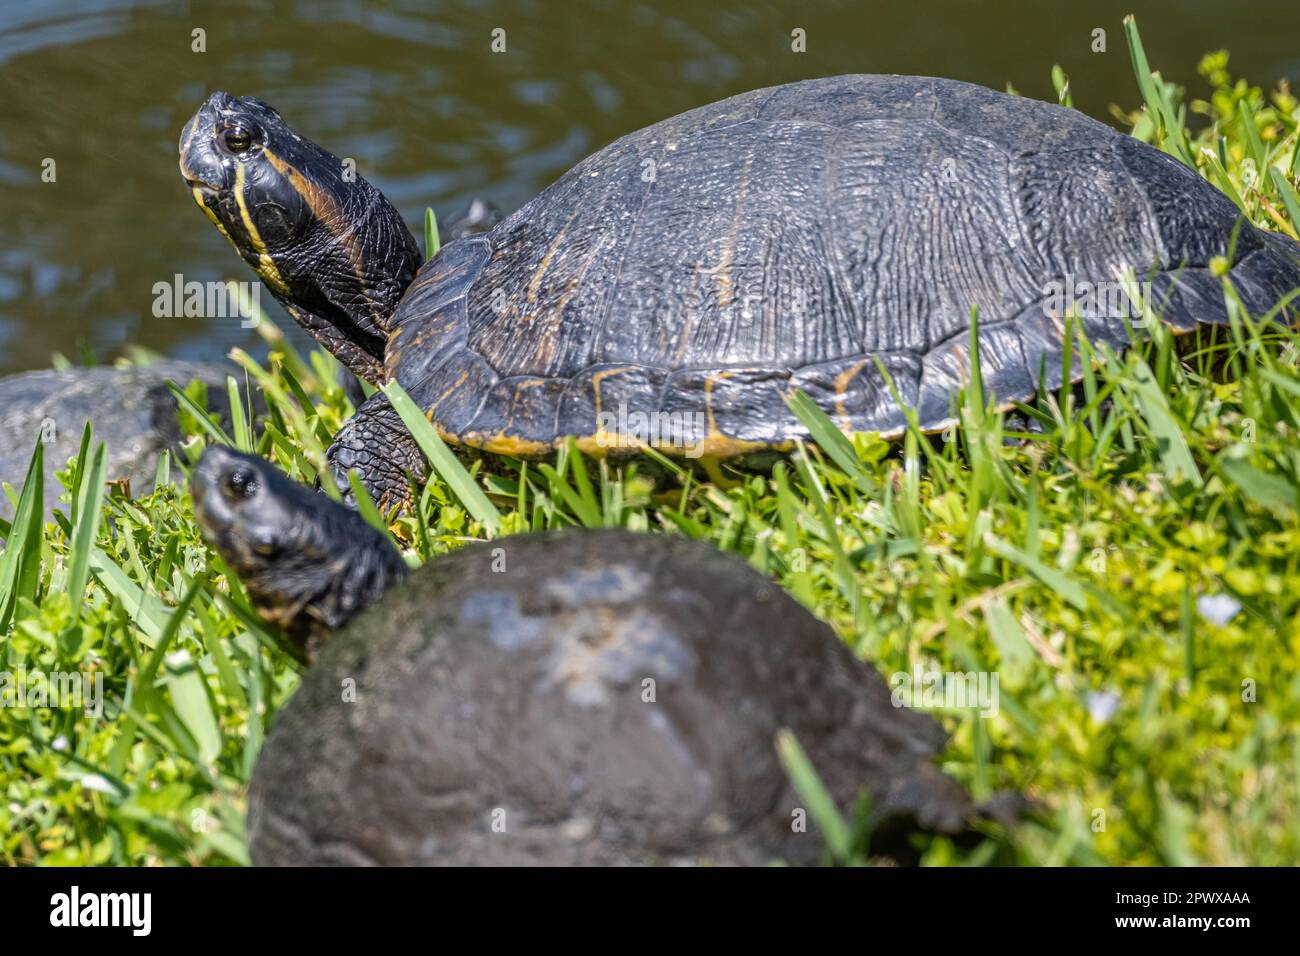 Peninsula cooters (Pseudemys peninsularis) sunning on the shoreline of a pond in Ponte Vedra Beach, Florida. (USA) Stock Photo